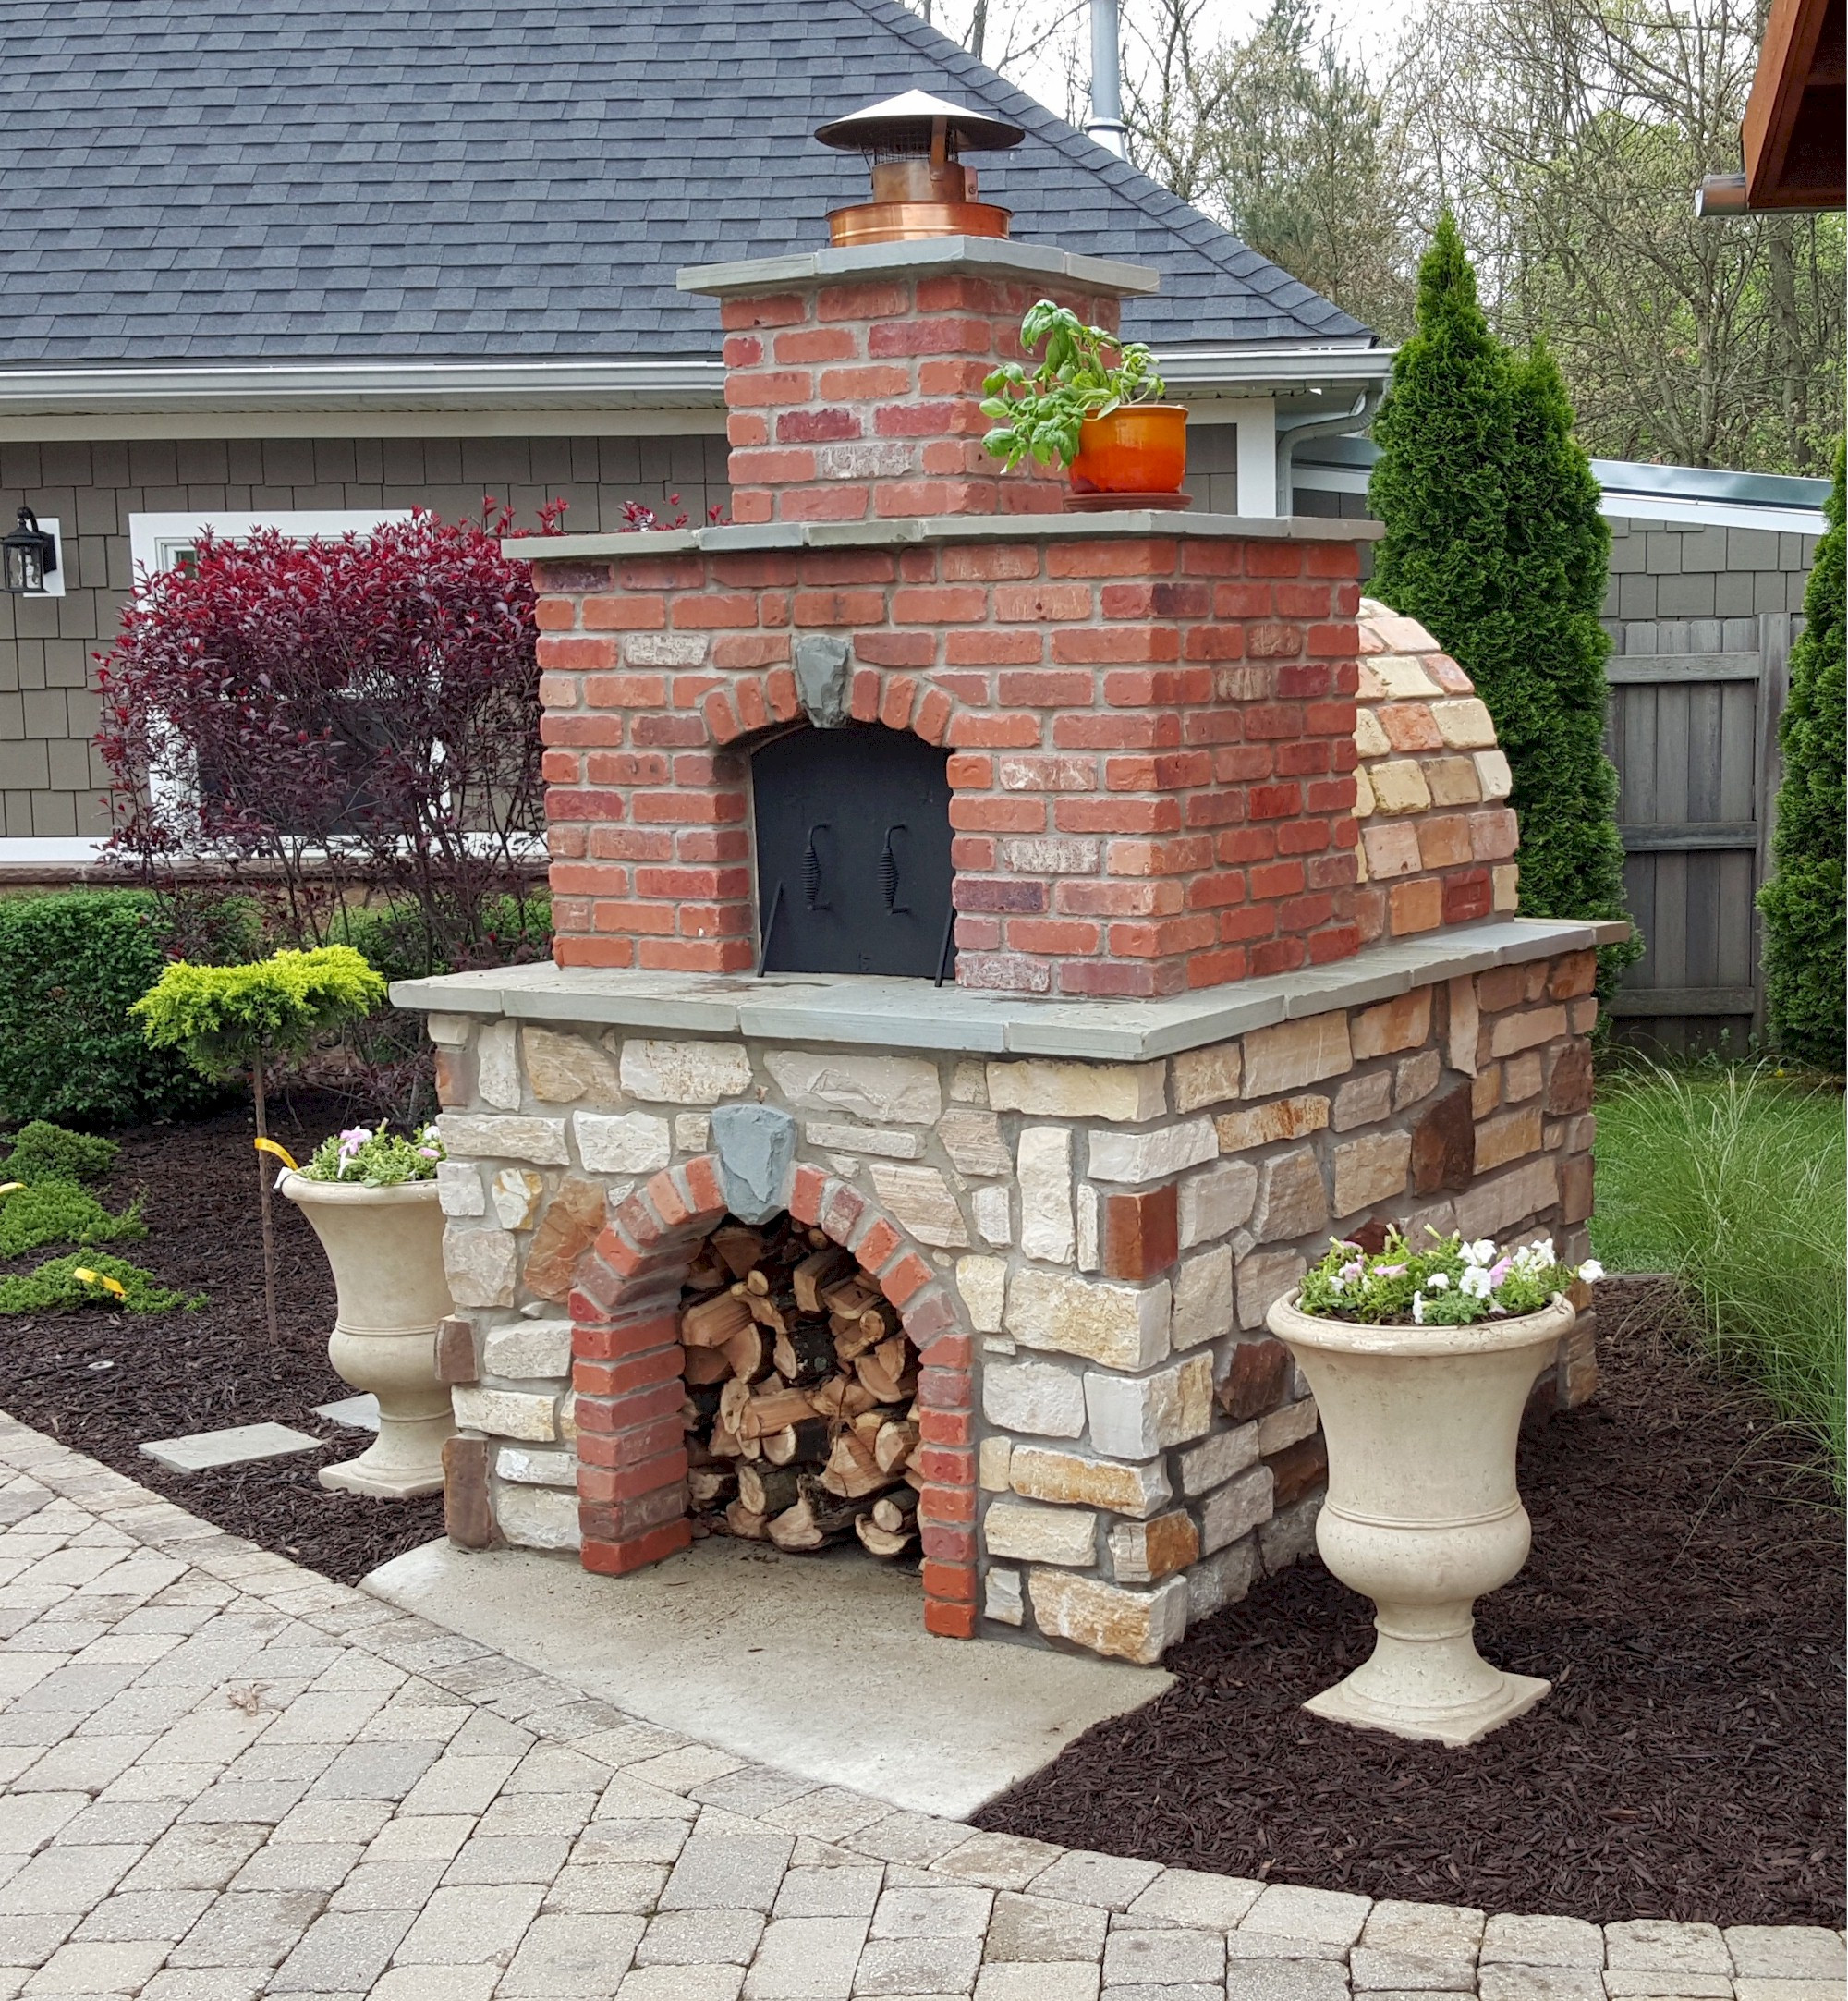 Outdoor Wood Oven DIY
 DIY Wood Fired Outdoor Brick Pizza Ovens Are Not ly Easy